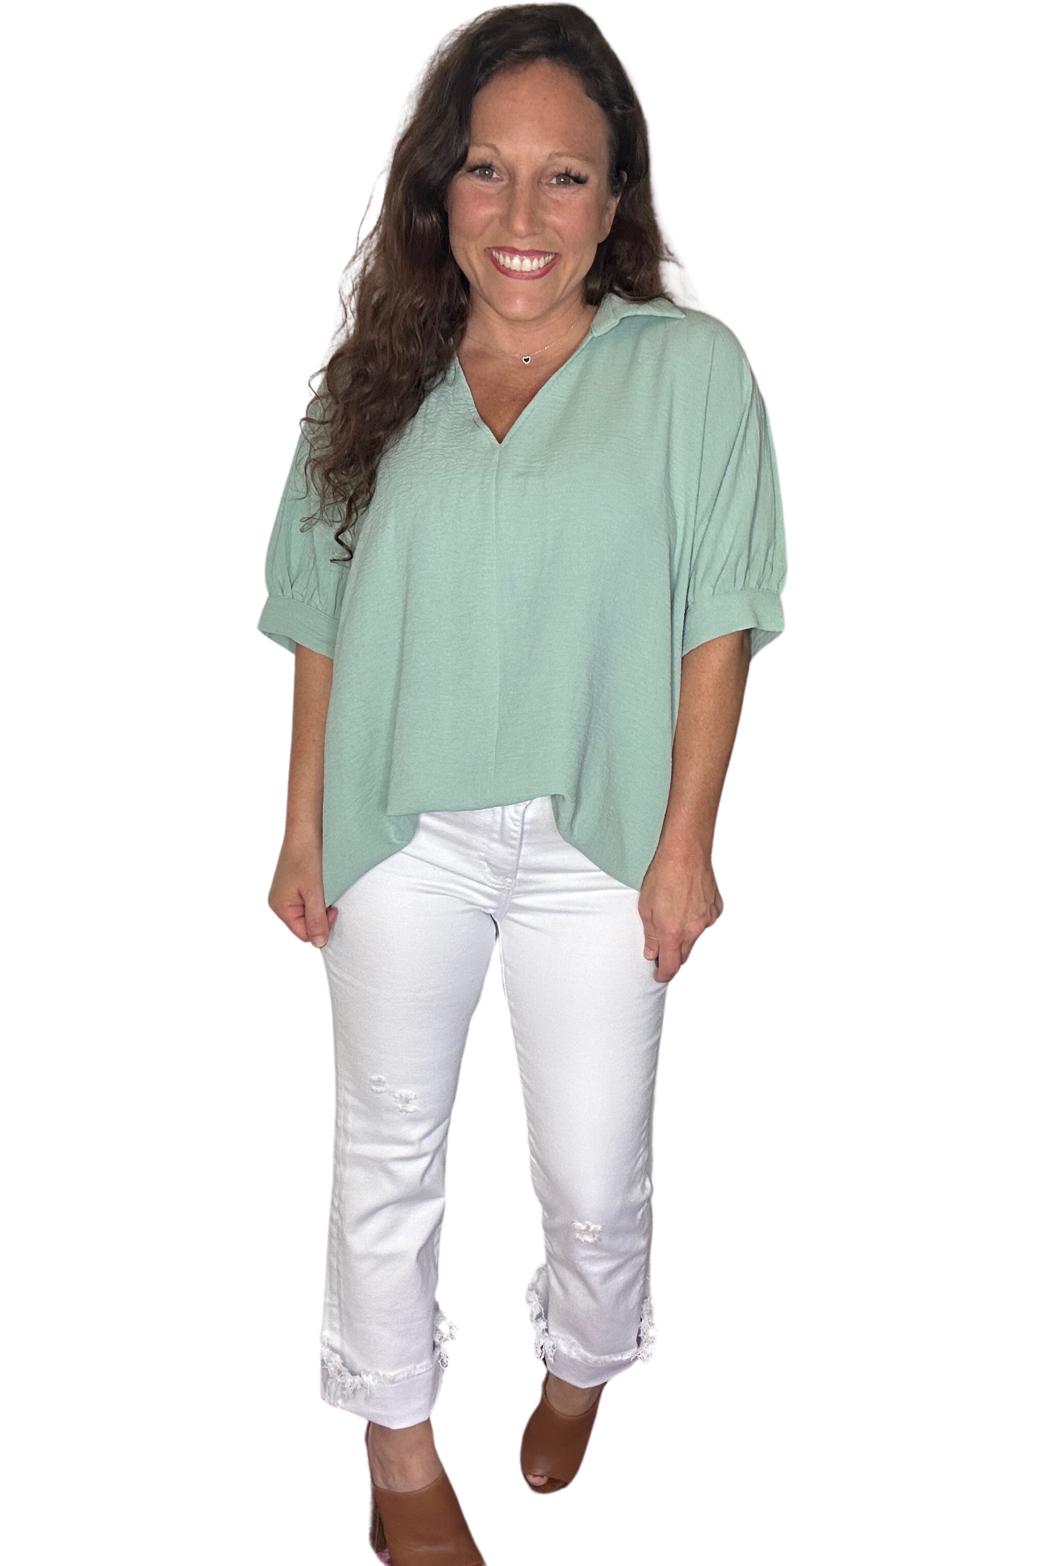 Jodifl - Solid Color Collared Top with Short Dolman Sleeves and Banded Cuffs - Vintage Dragonfly Boutique